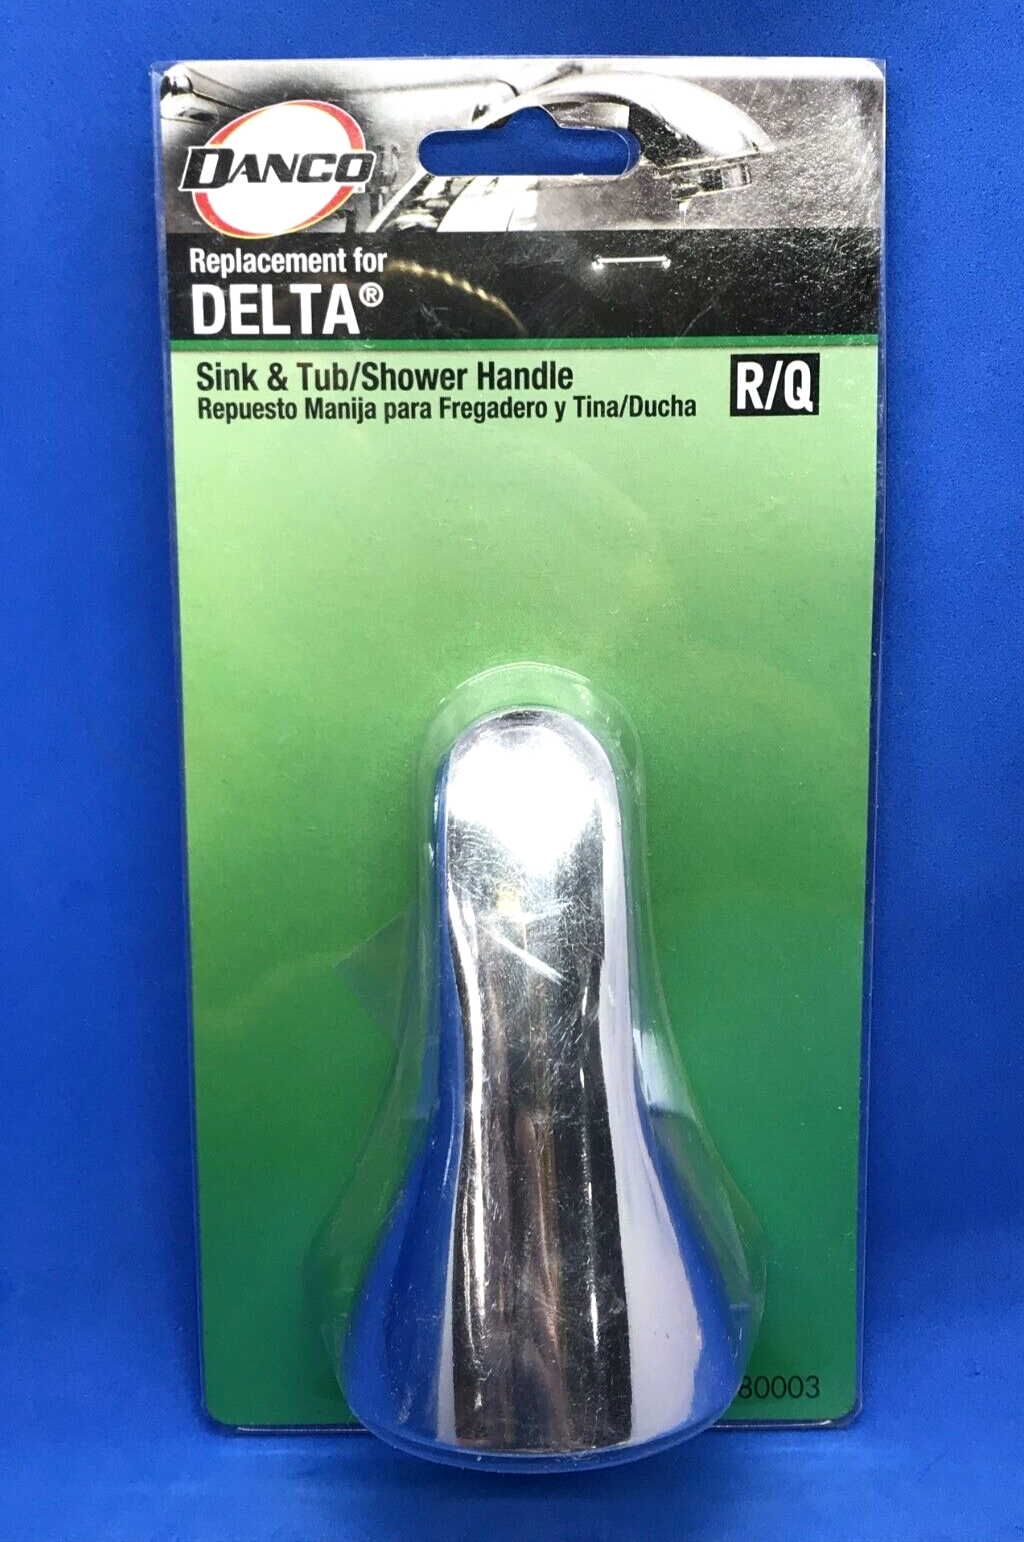 Danco Replacement for Delta  Sink & Tub/Shower Handle Chrome Finish R/Q #80003 - $14.99